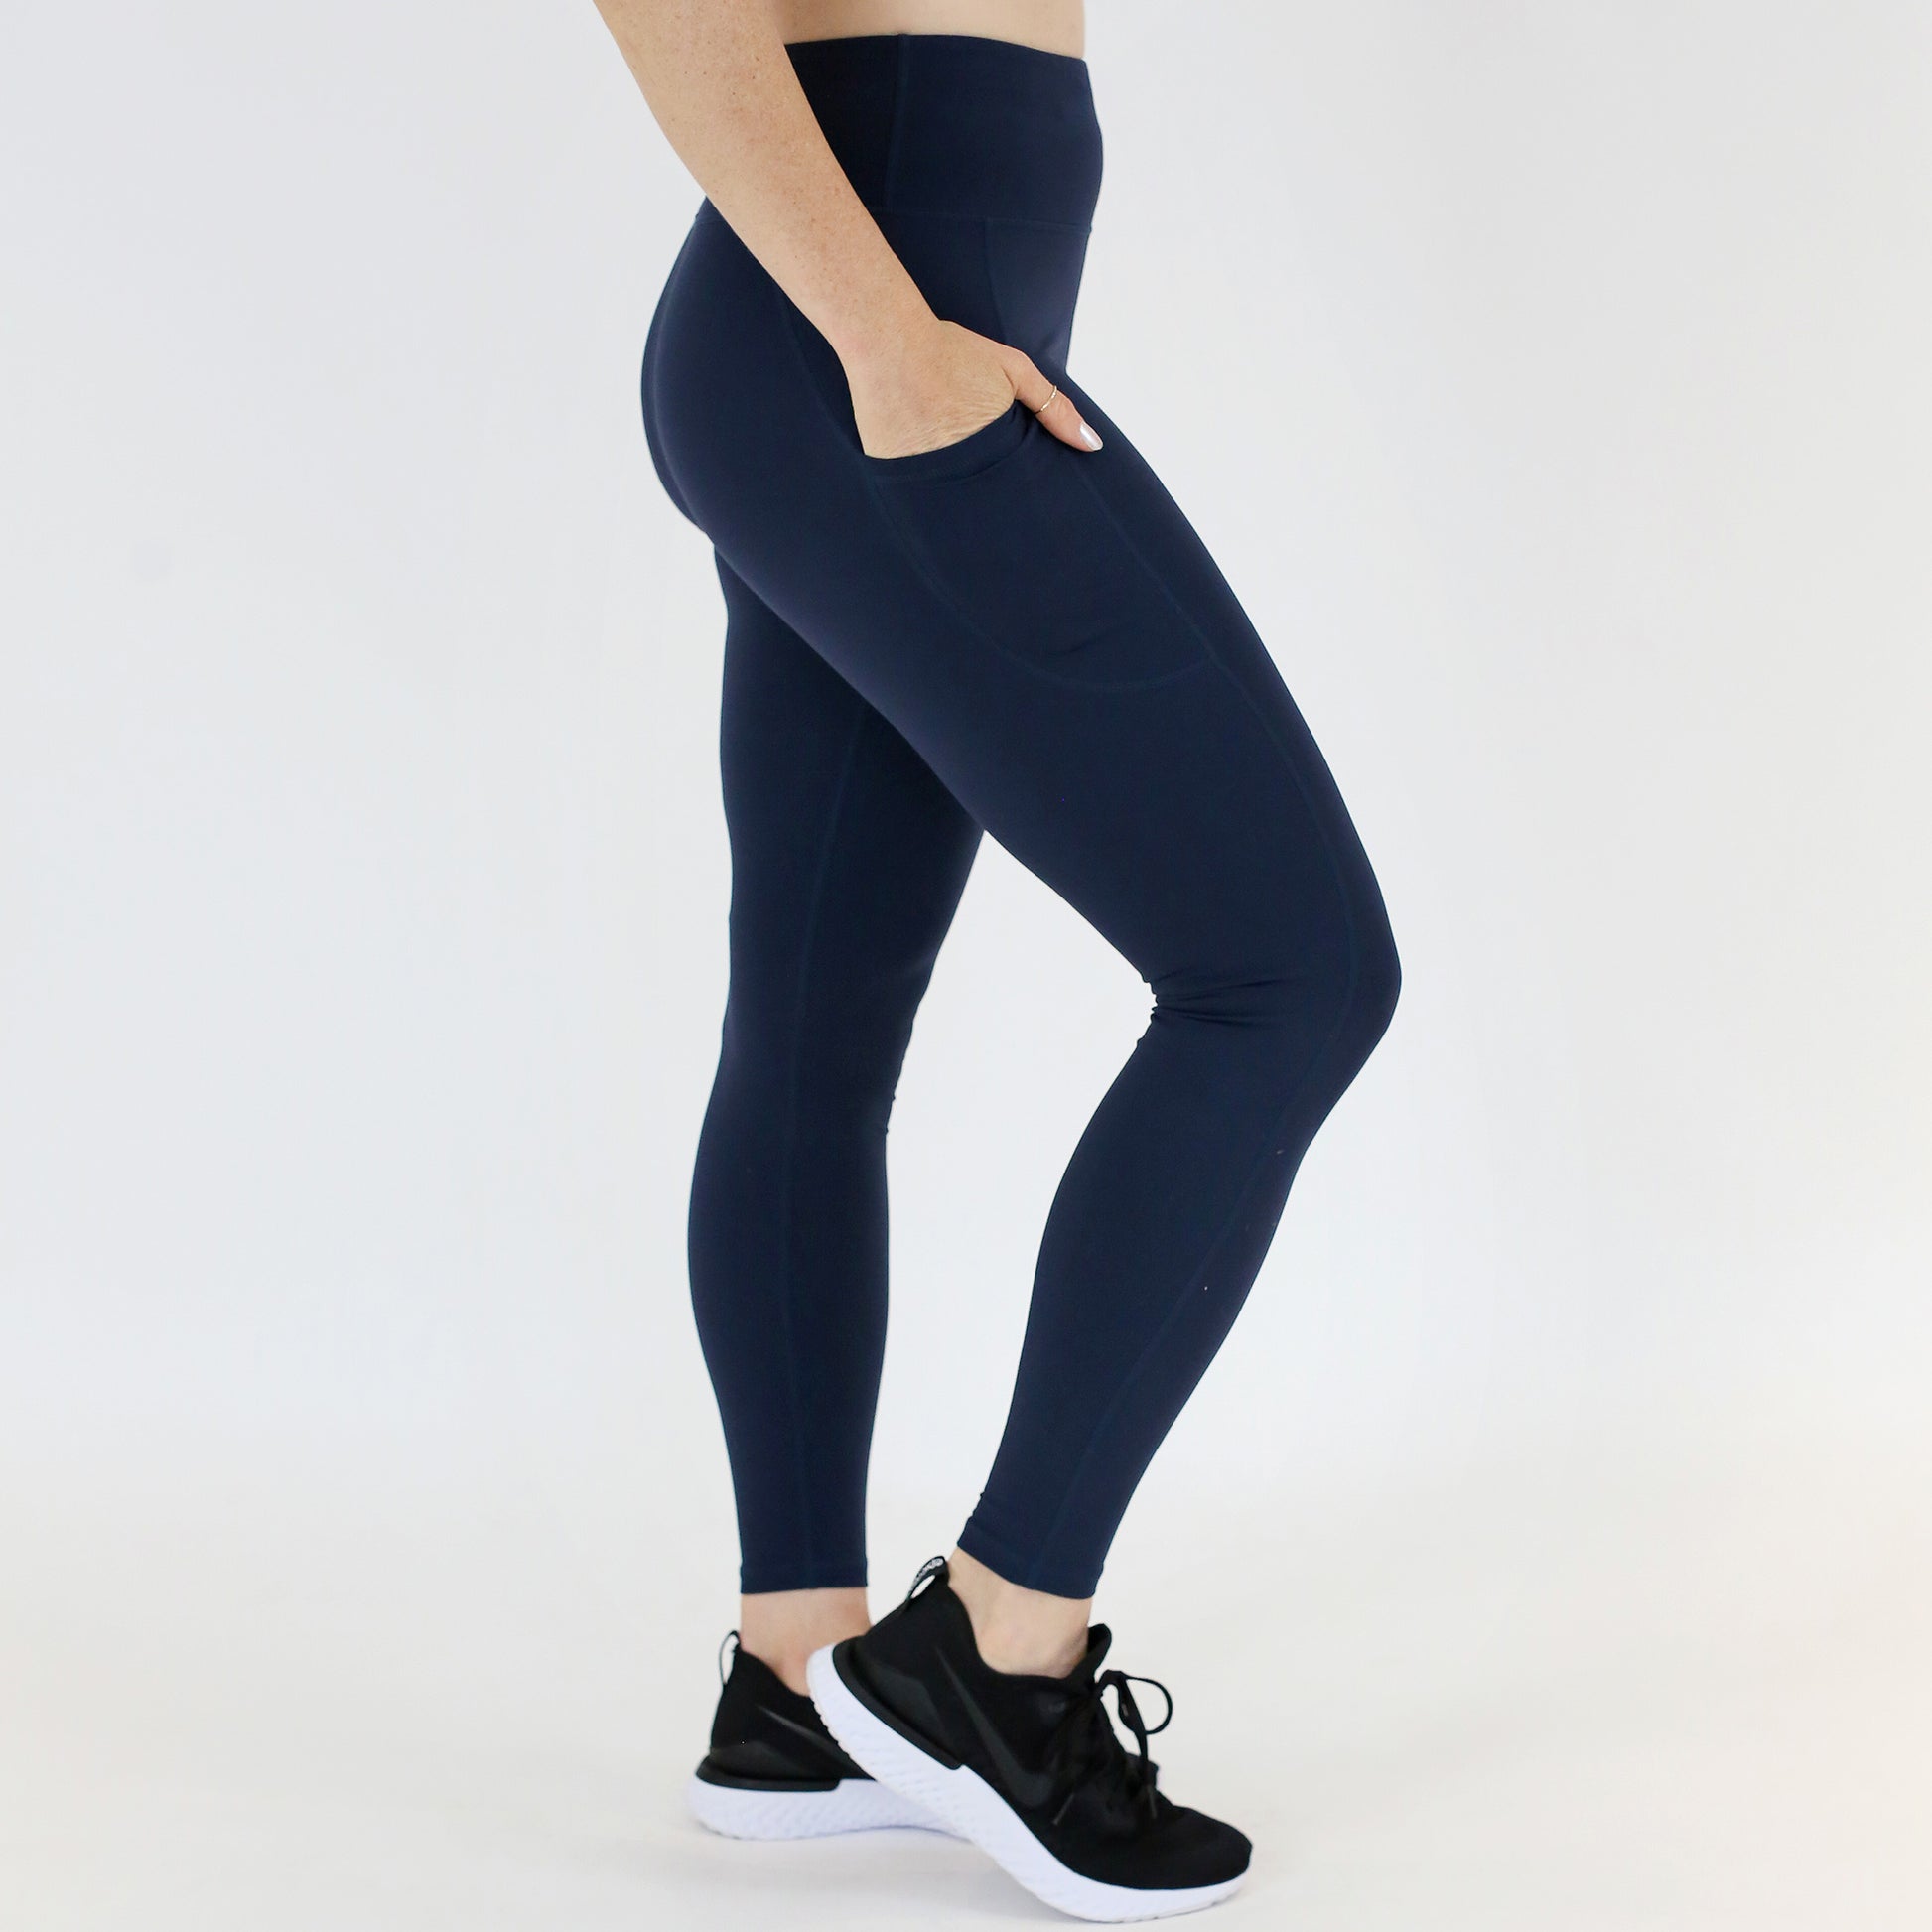 HIGH-RISE LEGGING WITH POCKETS - NAVY